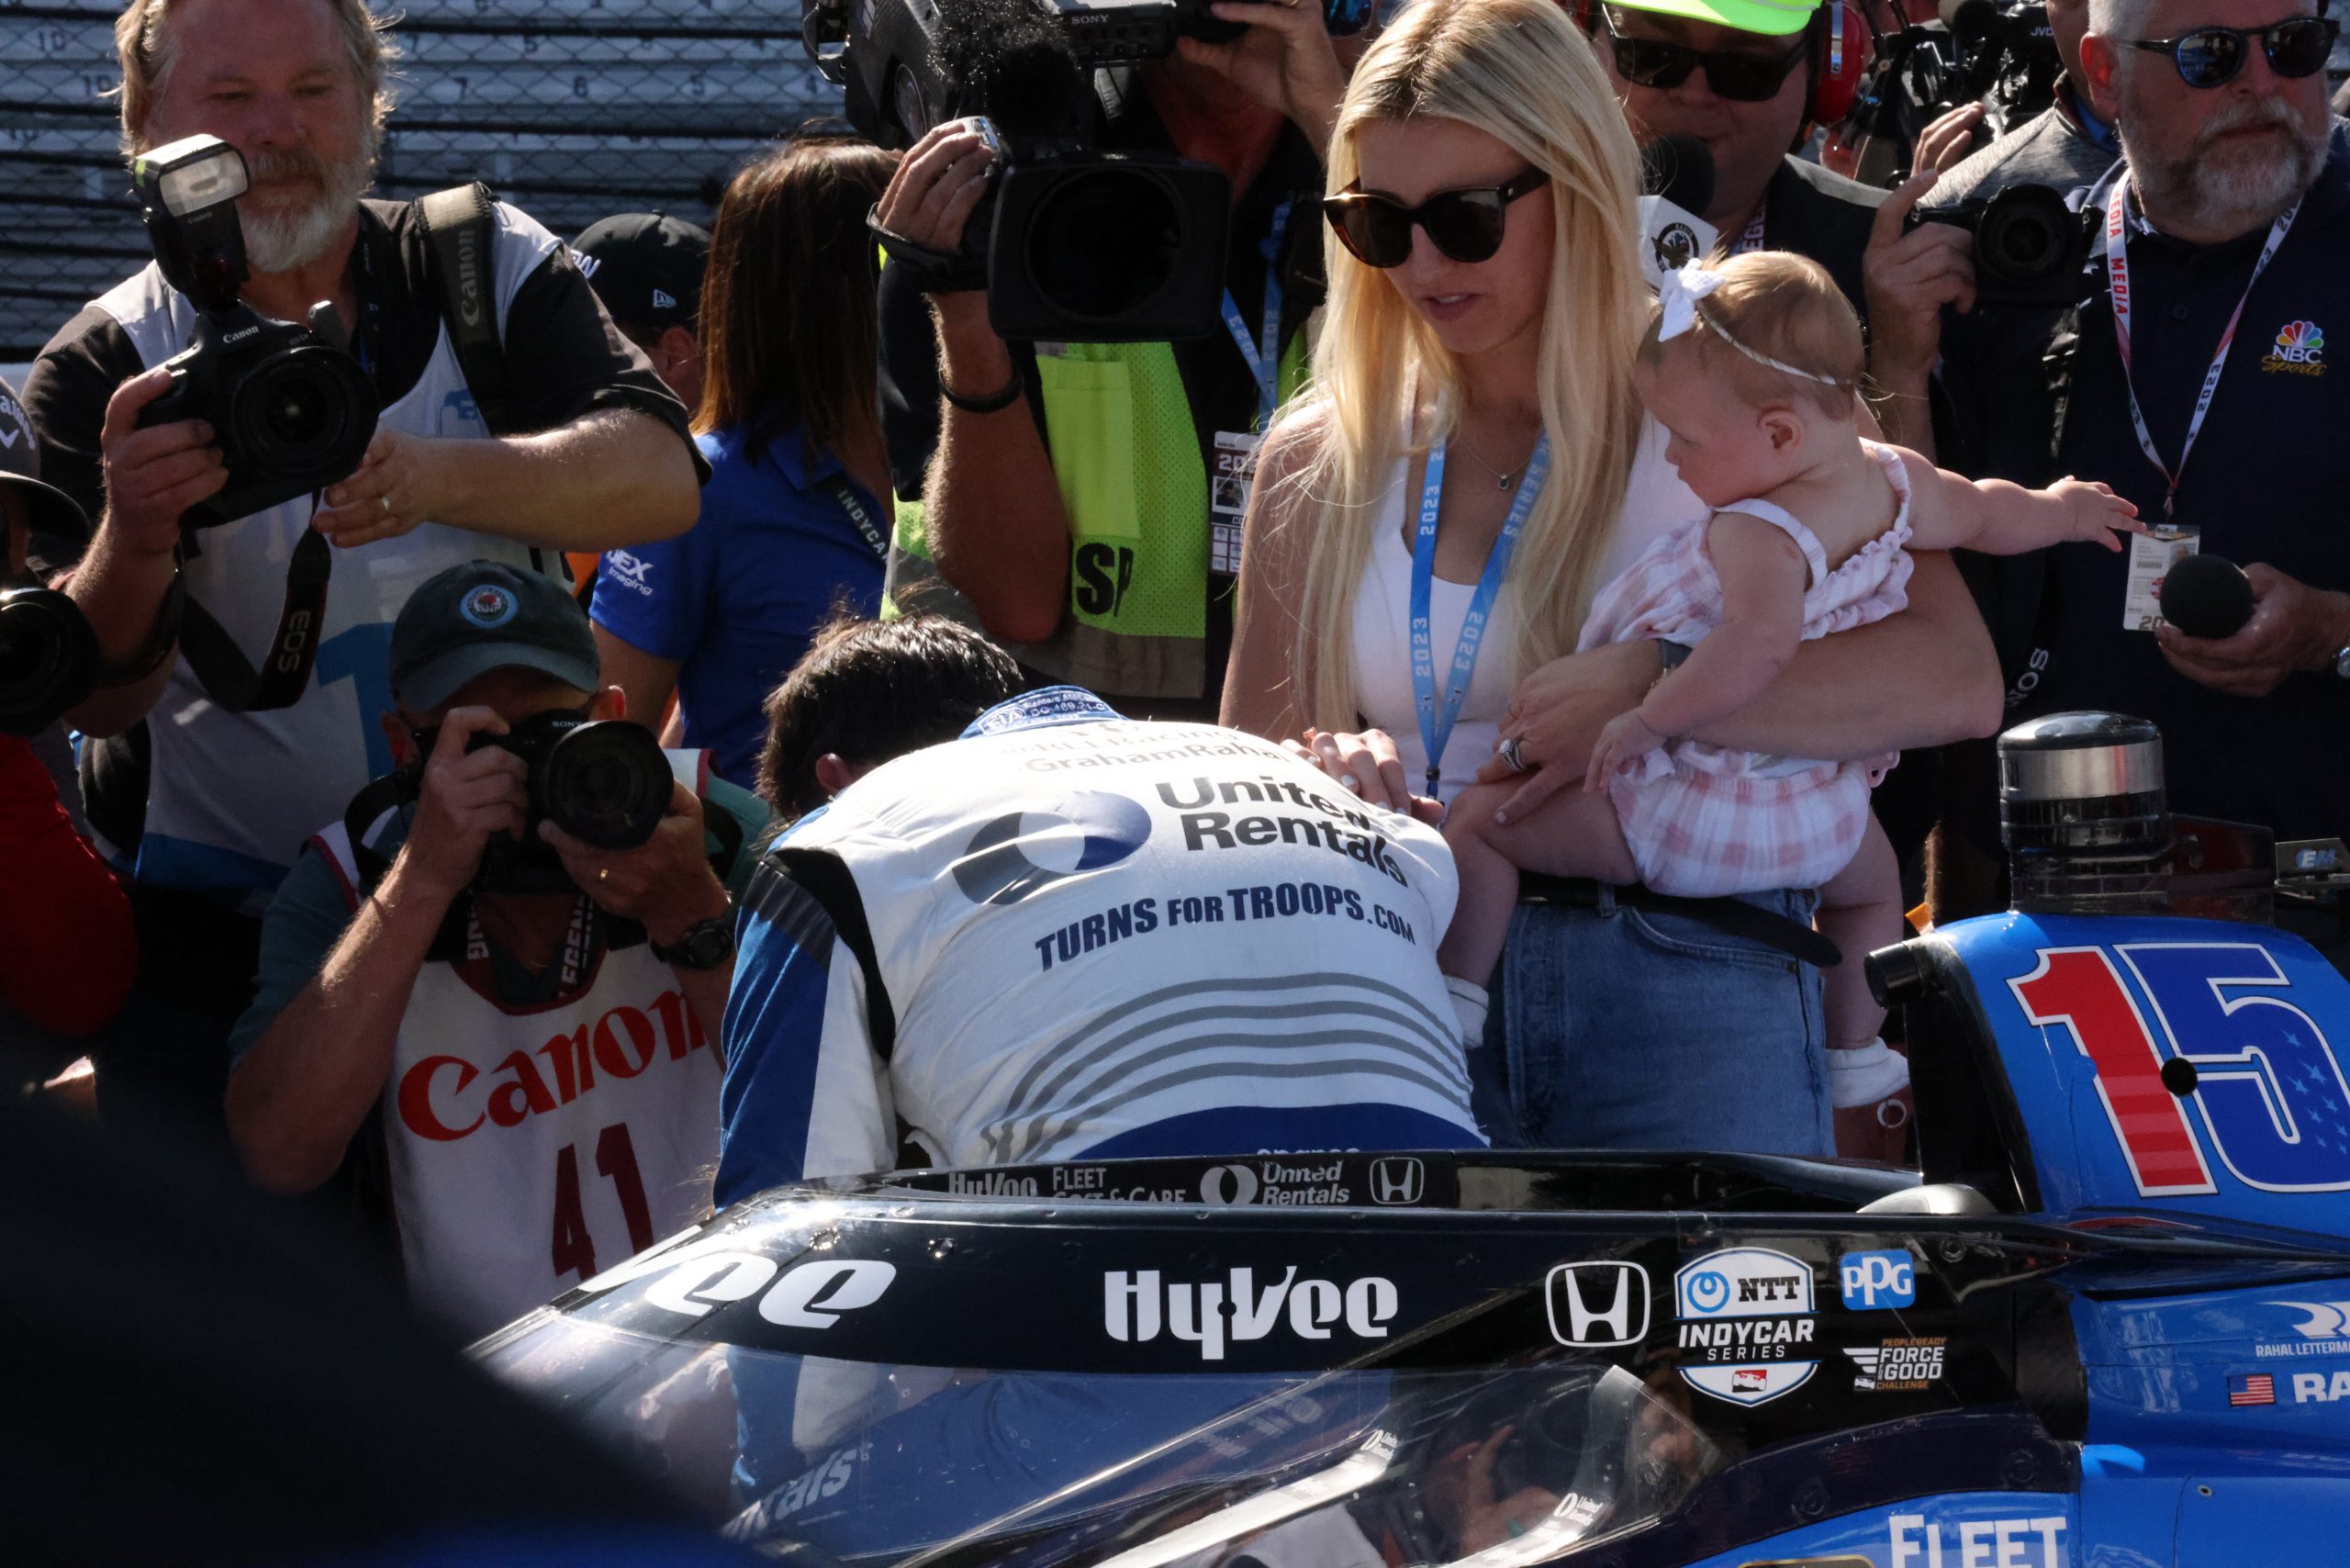 Graham Rahal's wife, Courtney Force, consoles him after missing the Indy 500. (Photo: Luis Torres | The Podium Finish)